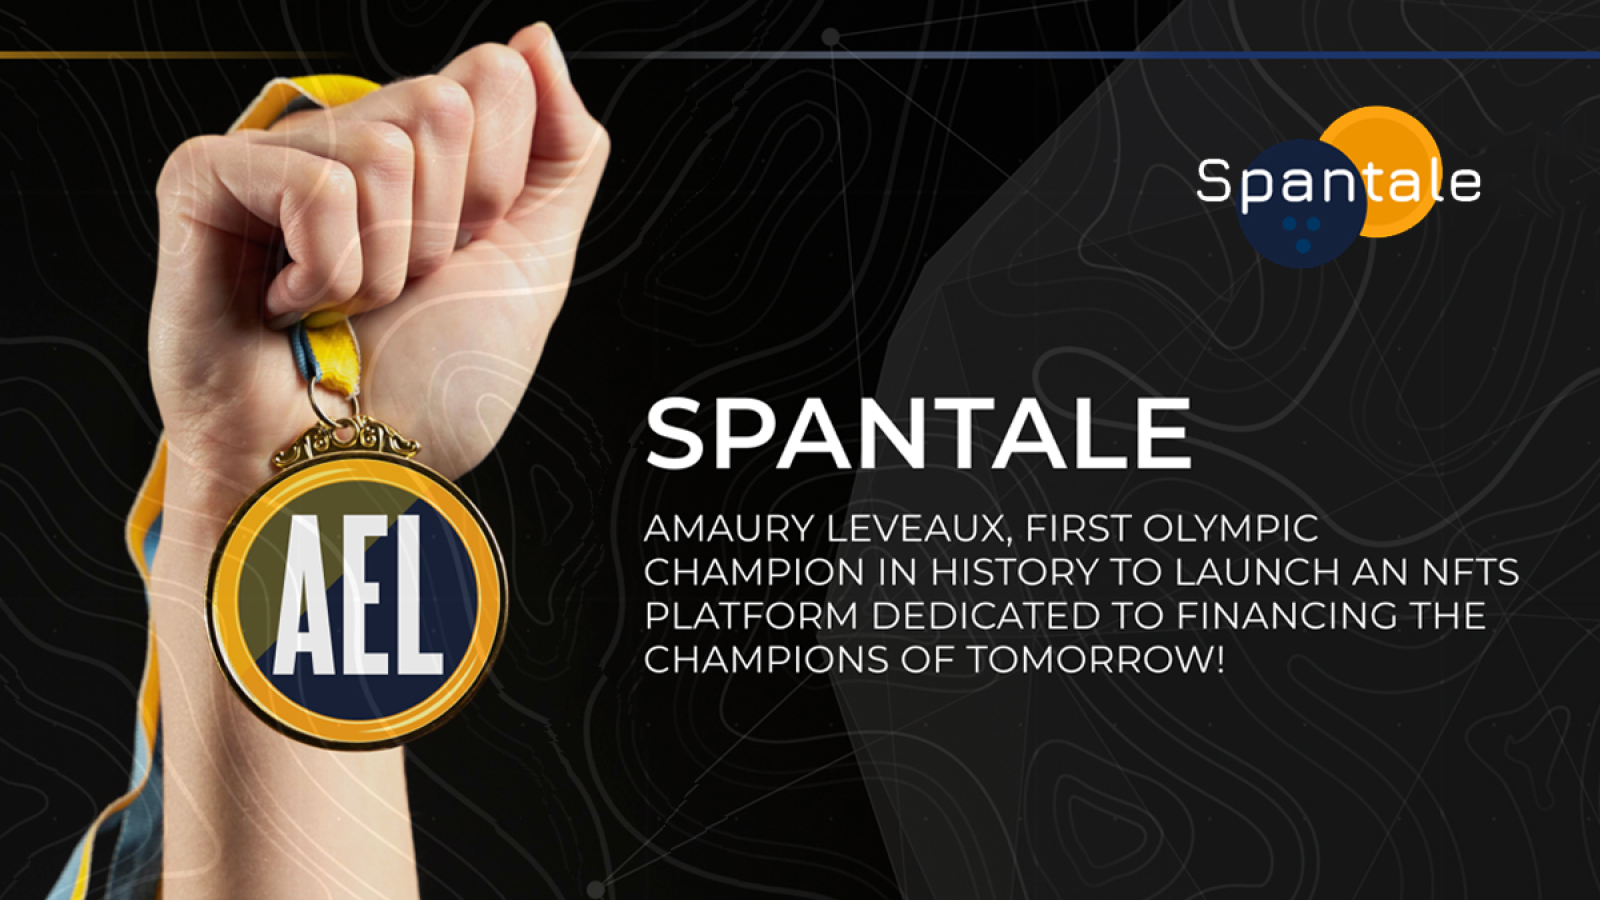 Spantale (AEL): Amaury Leveaux, First Olympic Champion in History to Launch an NFTs Platform Dedicated to Financing the Champions of Tomorrow!